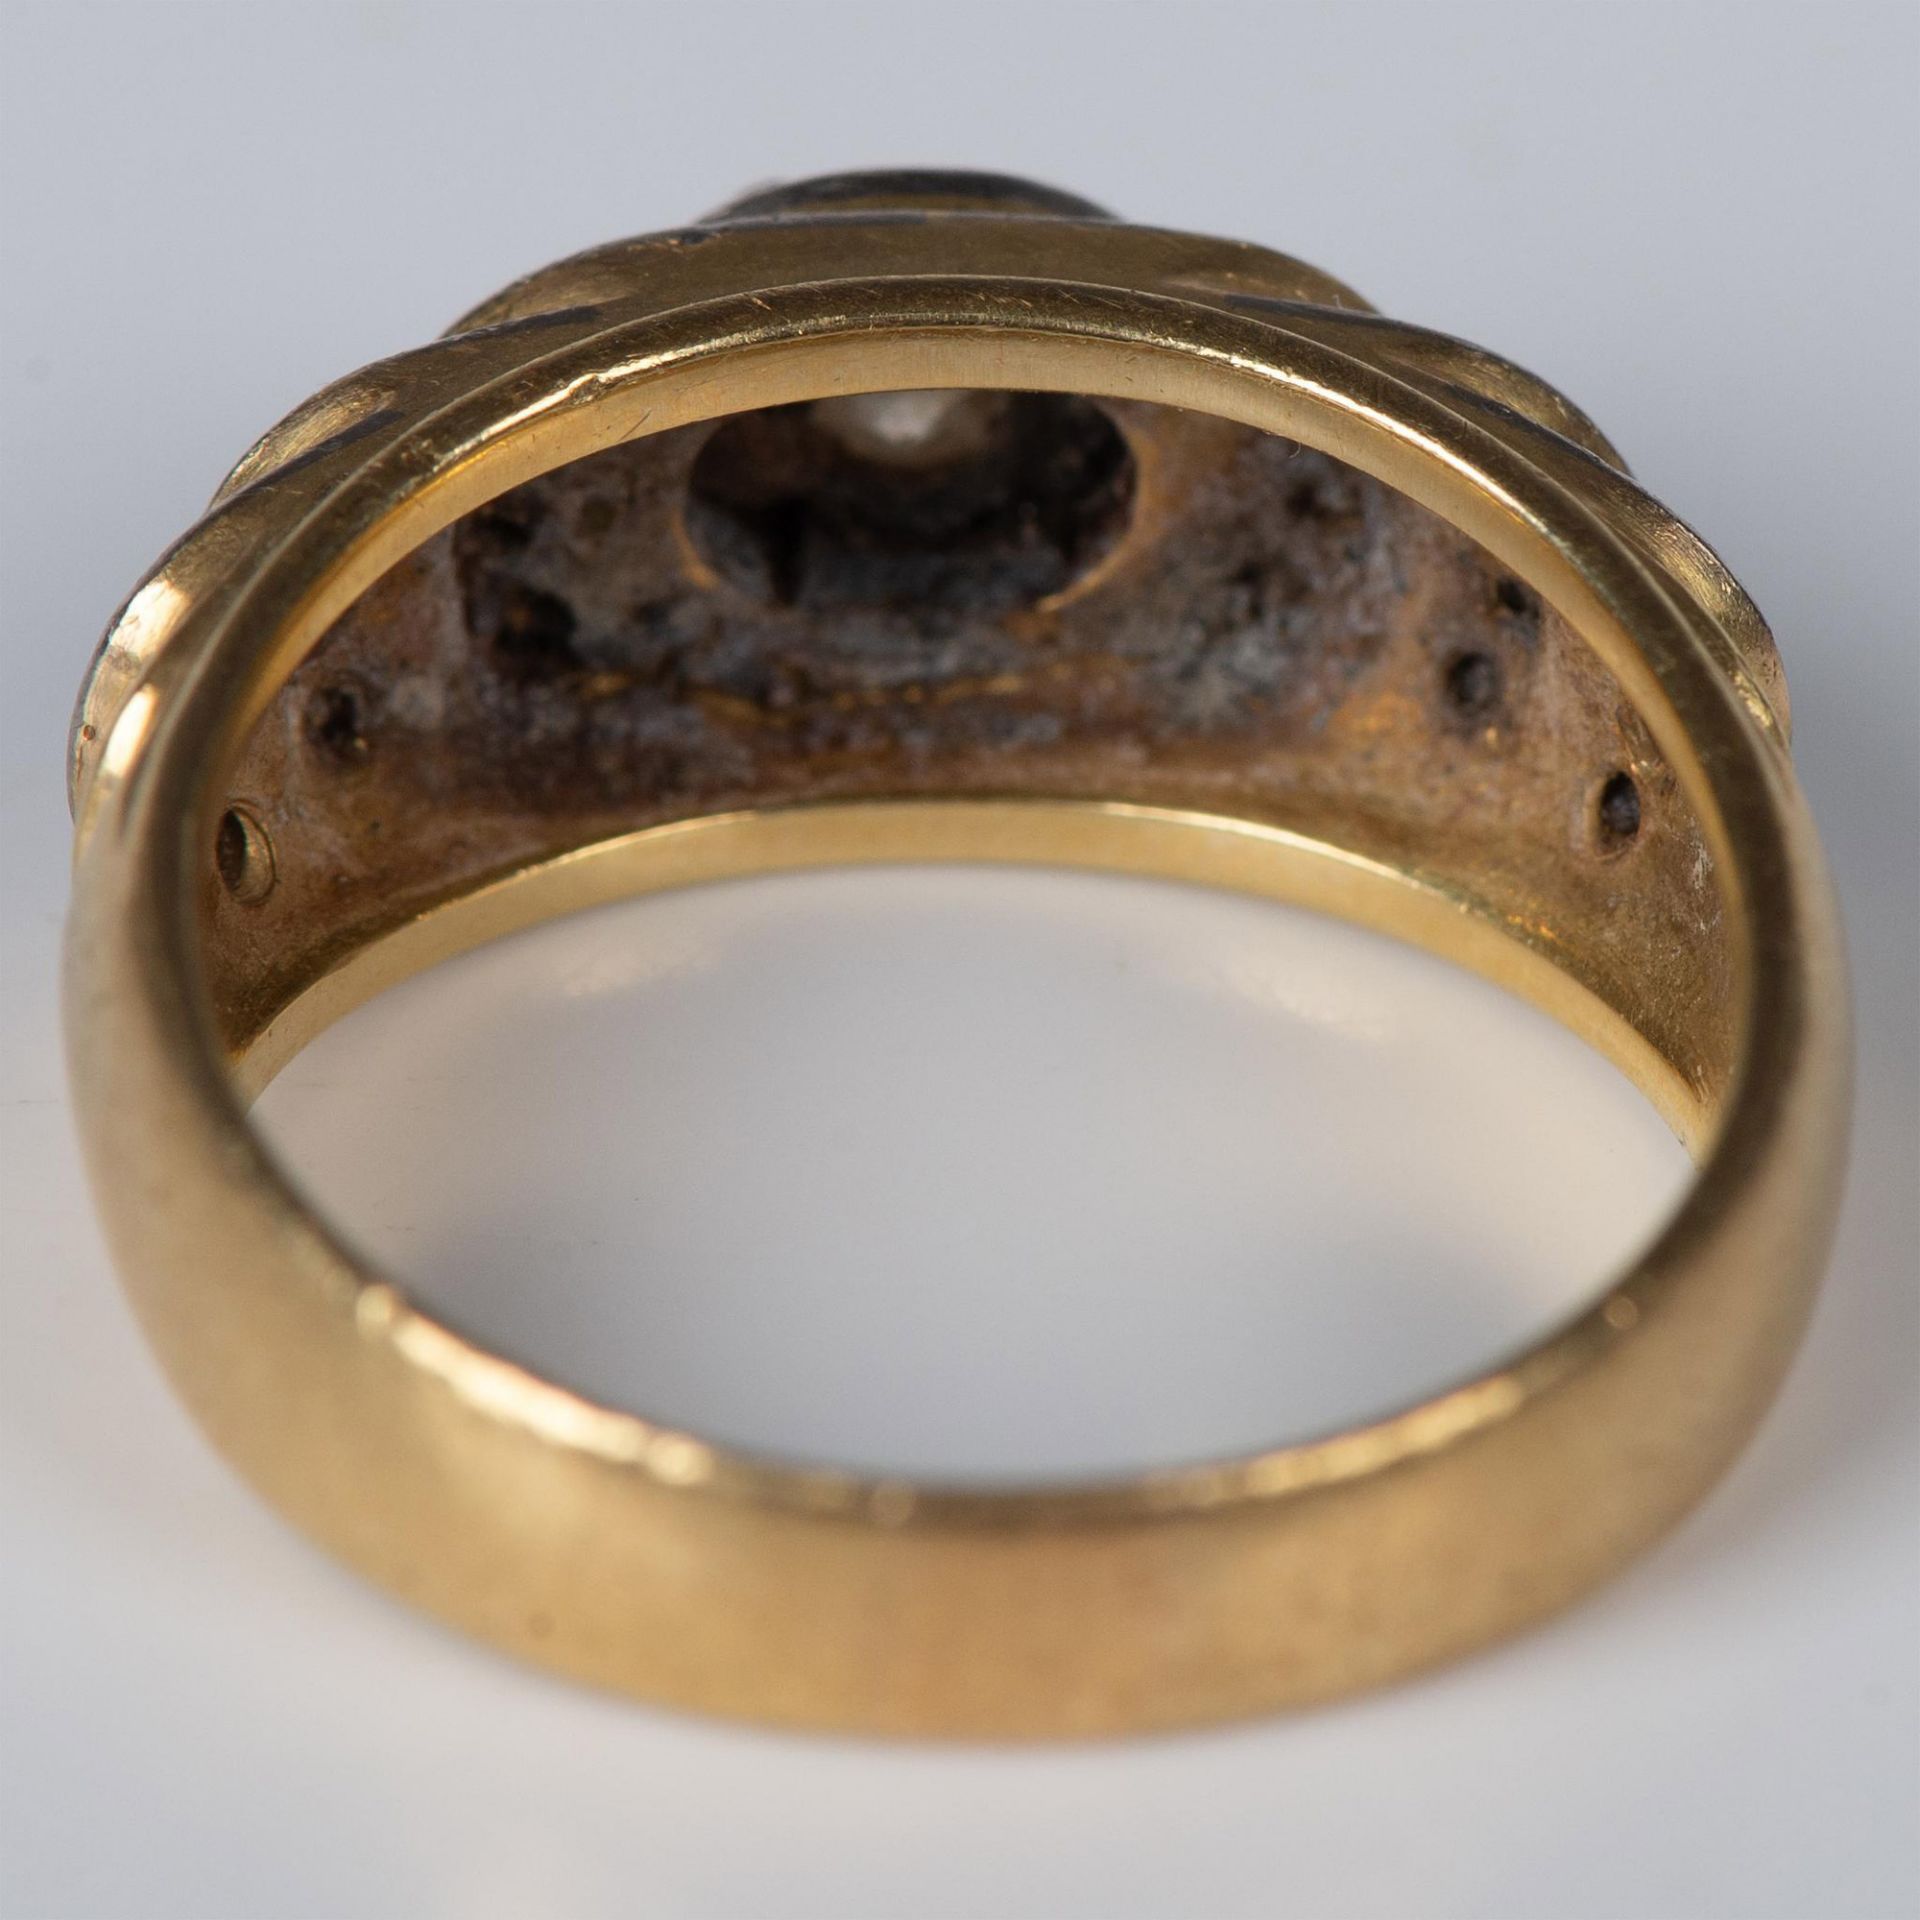 18K Gold and Diamond Ring - Image 3 of 7